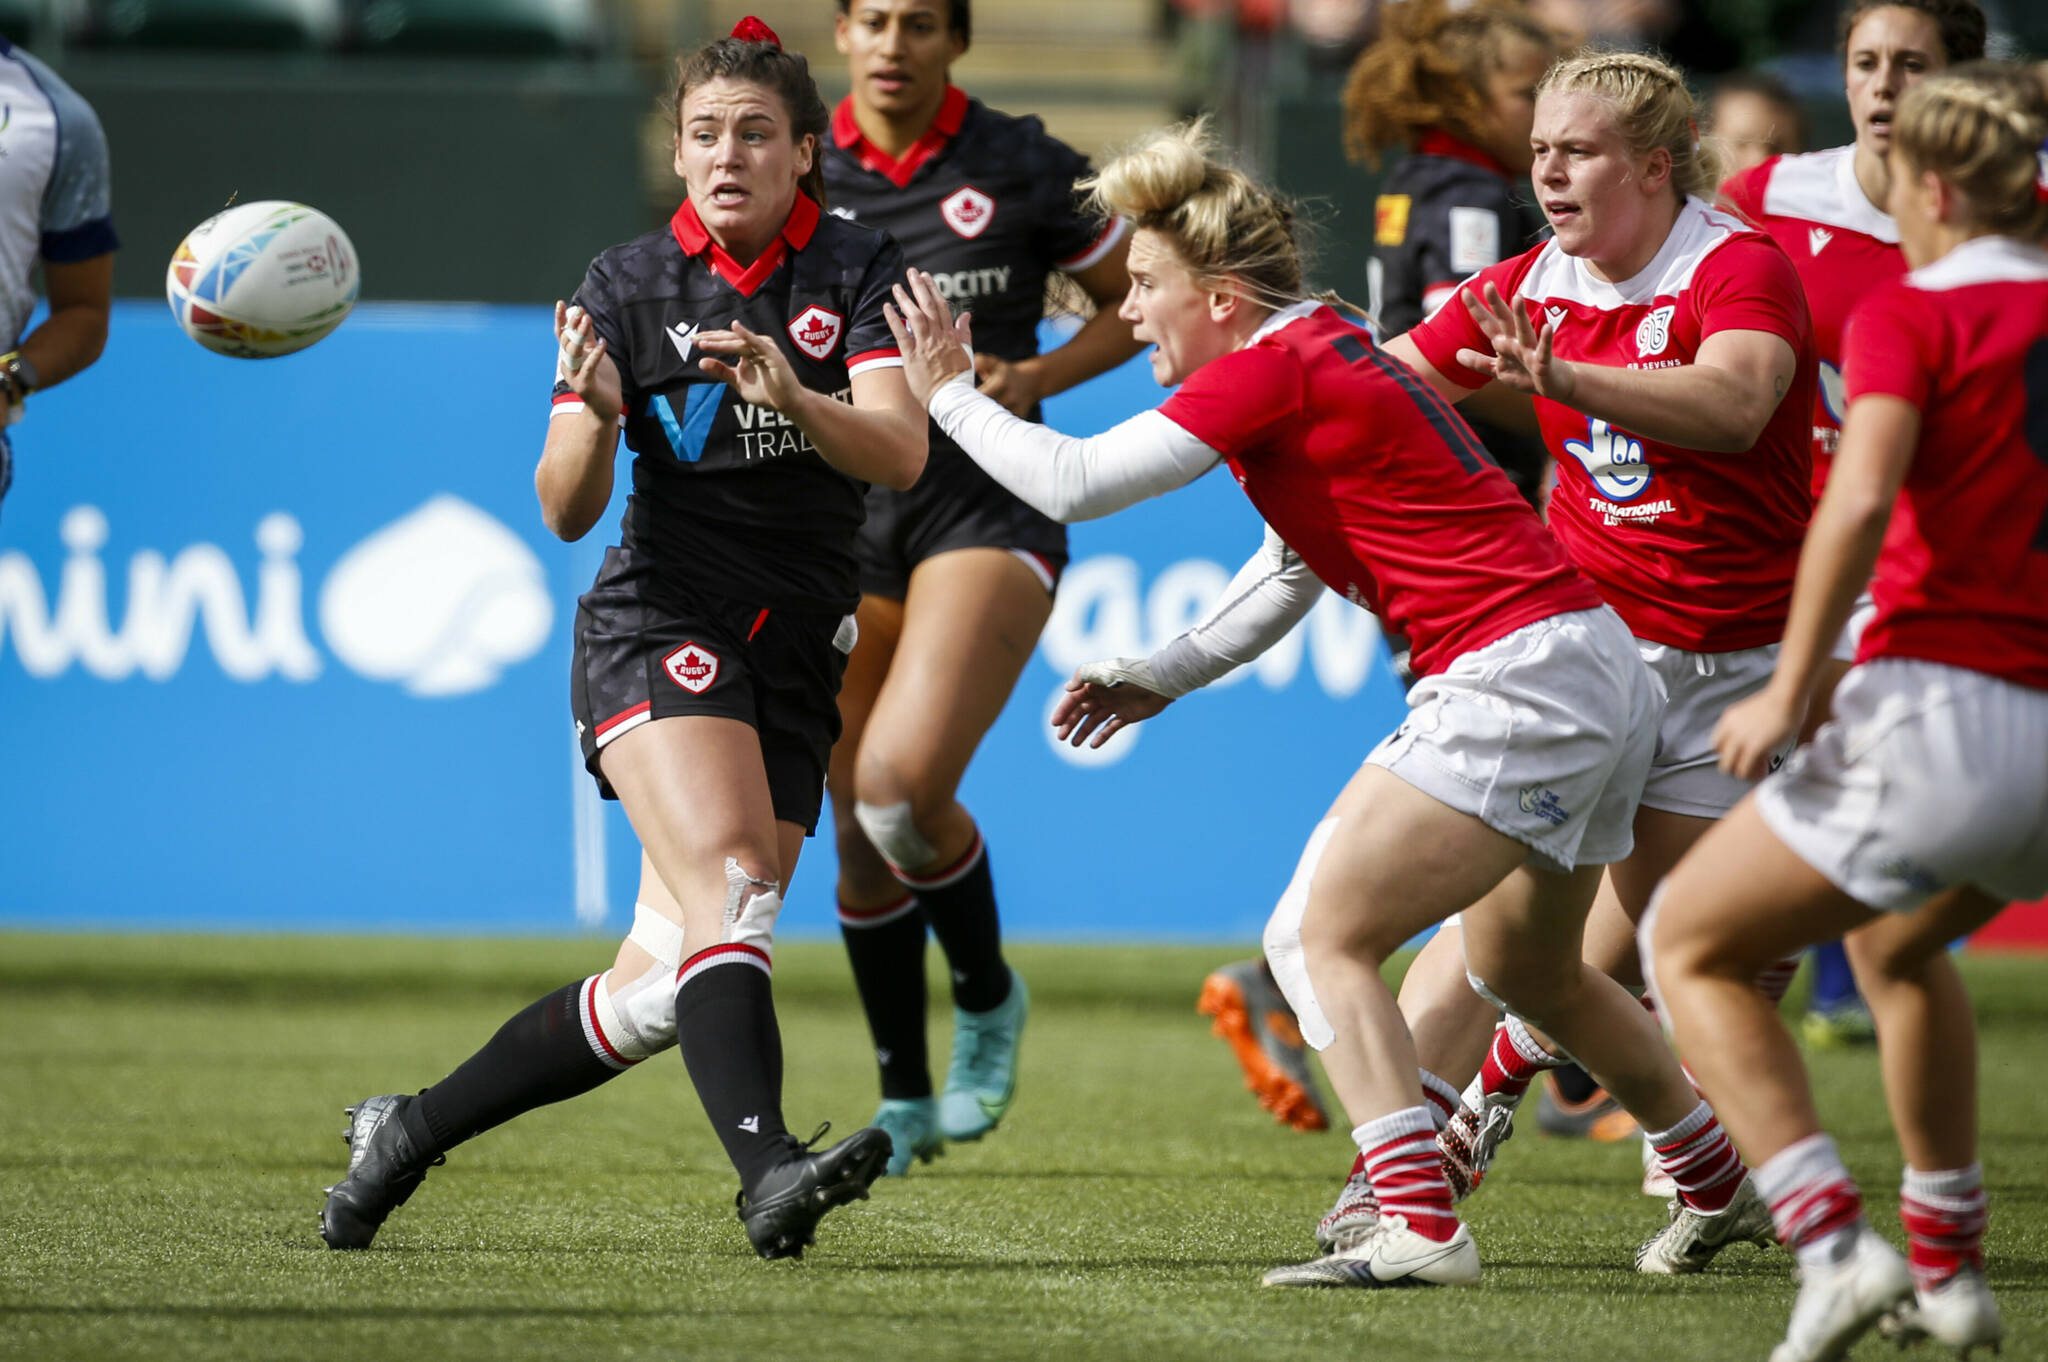 Canada's Alysha Corrigan, front left, passes the ball as Britain's Megan Jones grabs her during a women's HSBC Canada Sevens rugby match in Edmonton, Alberta, Saturday, Sept. 25, 2021. (Jeff McIntosh/The Canadian Press)